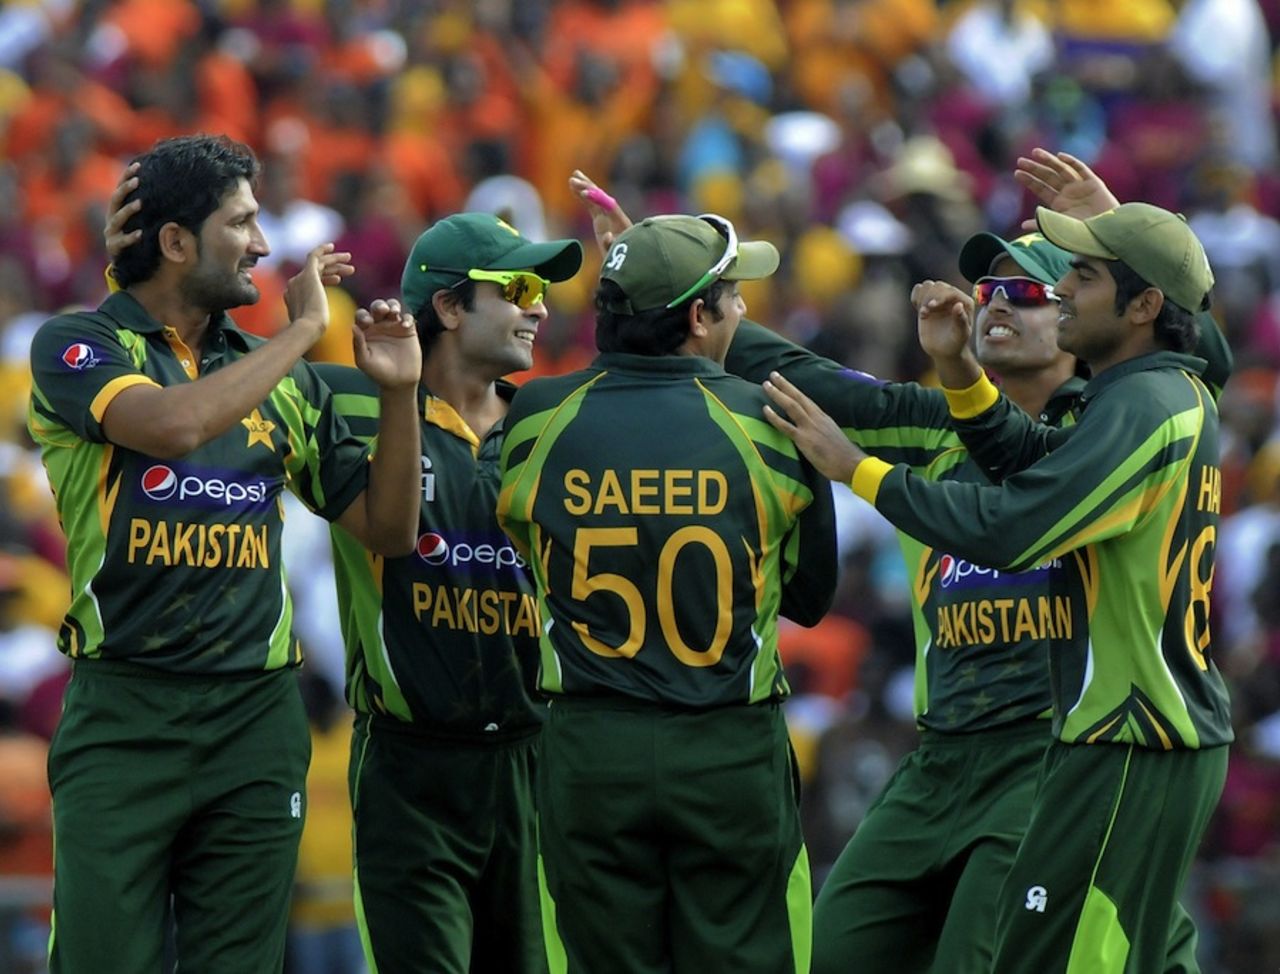 Sohail Tanvir picked up two wickets, West Indies v Pakistan, 2nd T20I, St Vincent, July 28, 2013